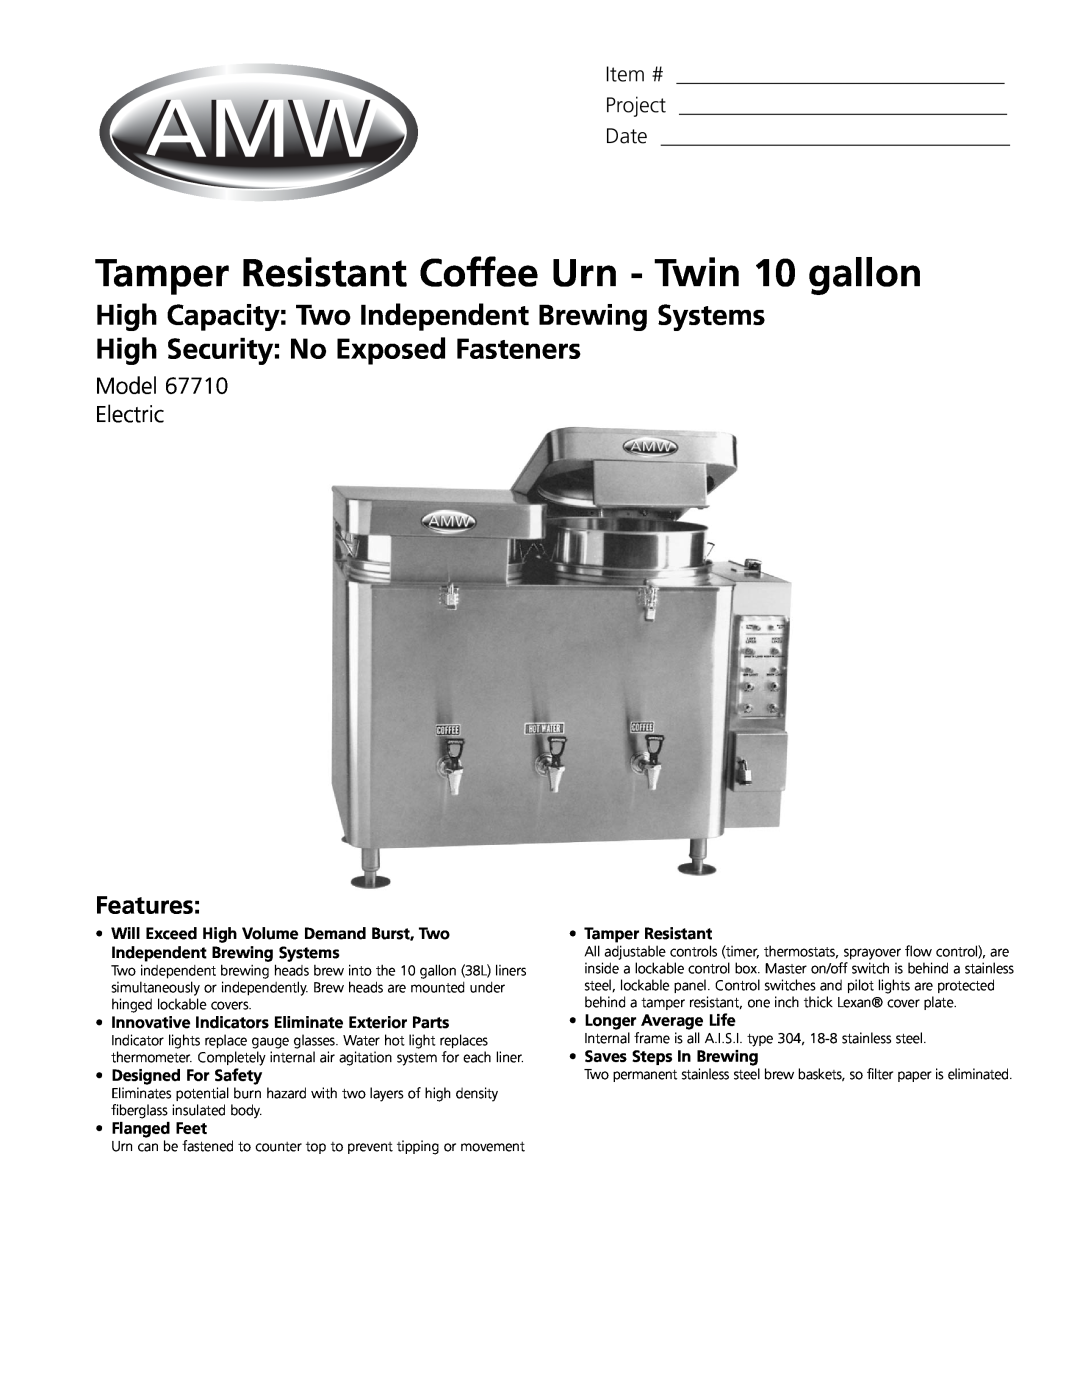 Grindmaster 67710 manual Tamper Resistant Coffee Urn - Twin 10 gallon, High Capacity Two Independent Brewing Systems, Date 